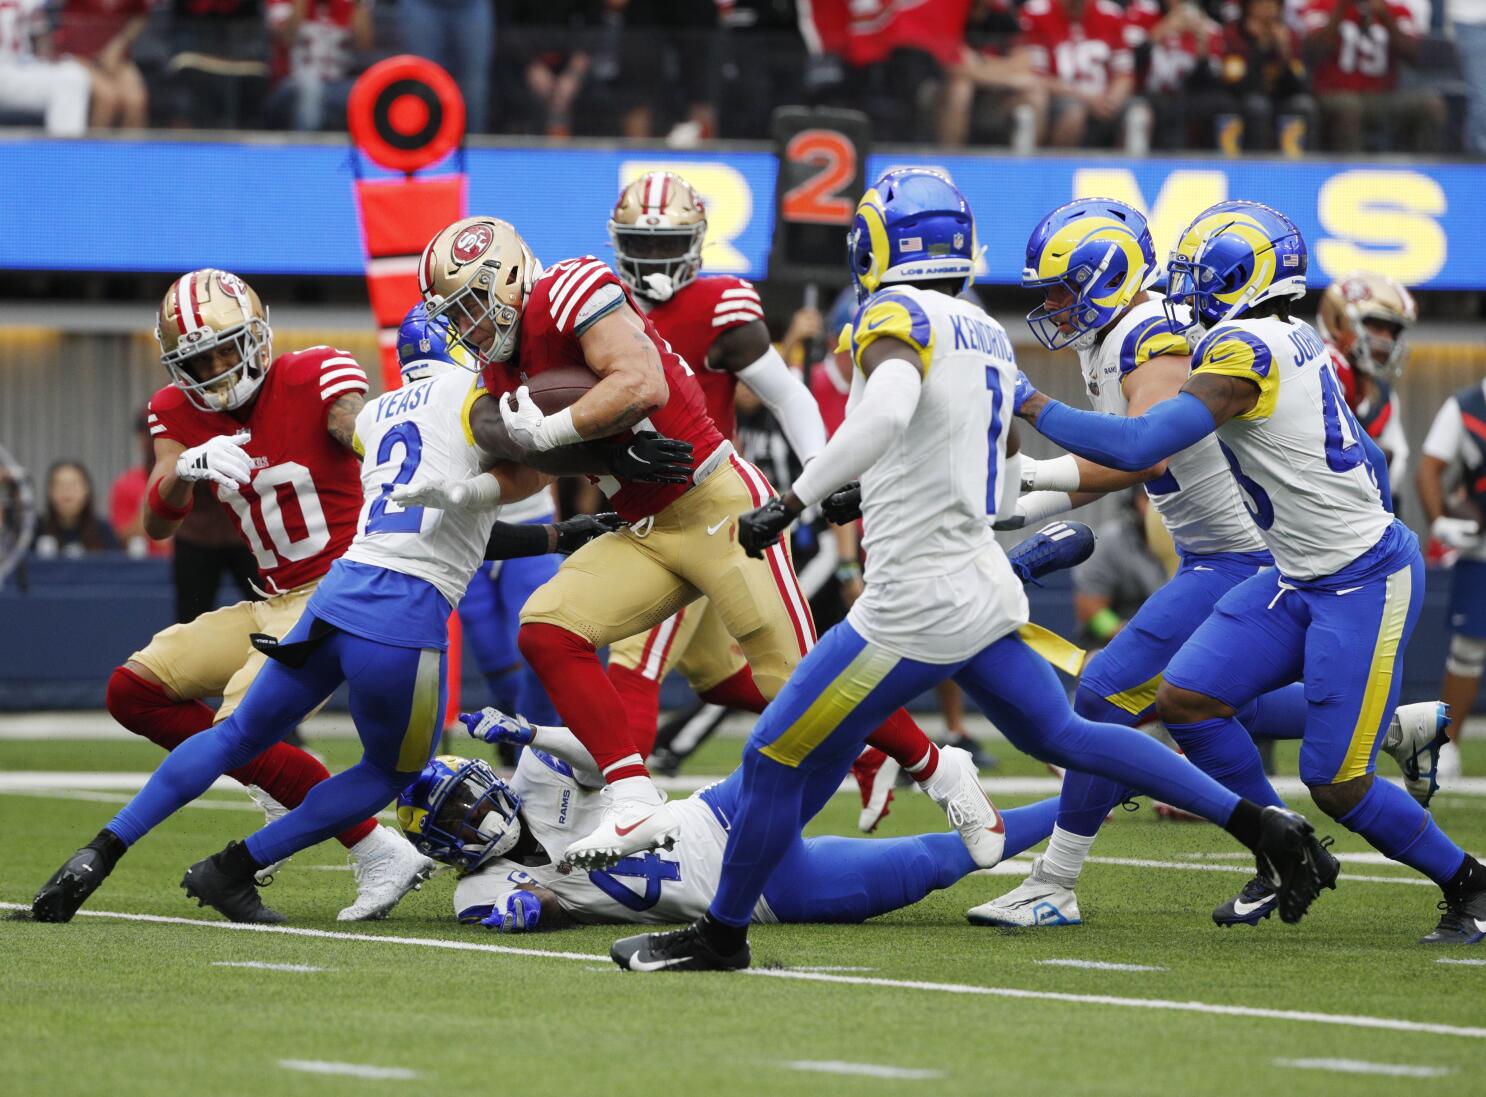 Key stats from the 49ers' 30-23 Week 2 win vs. the Rams